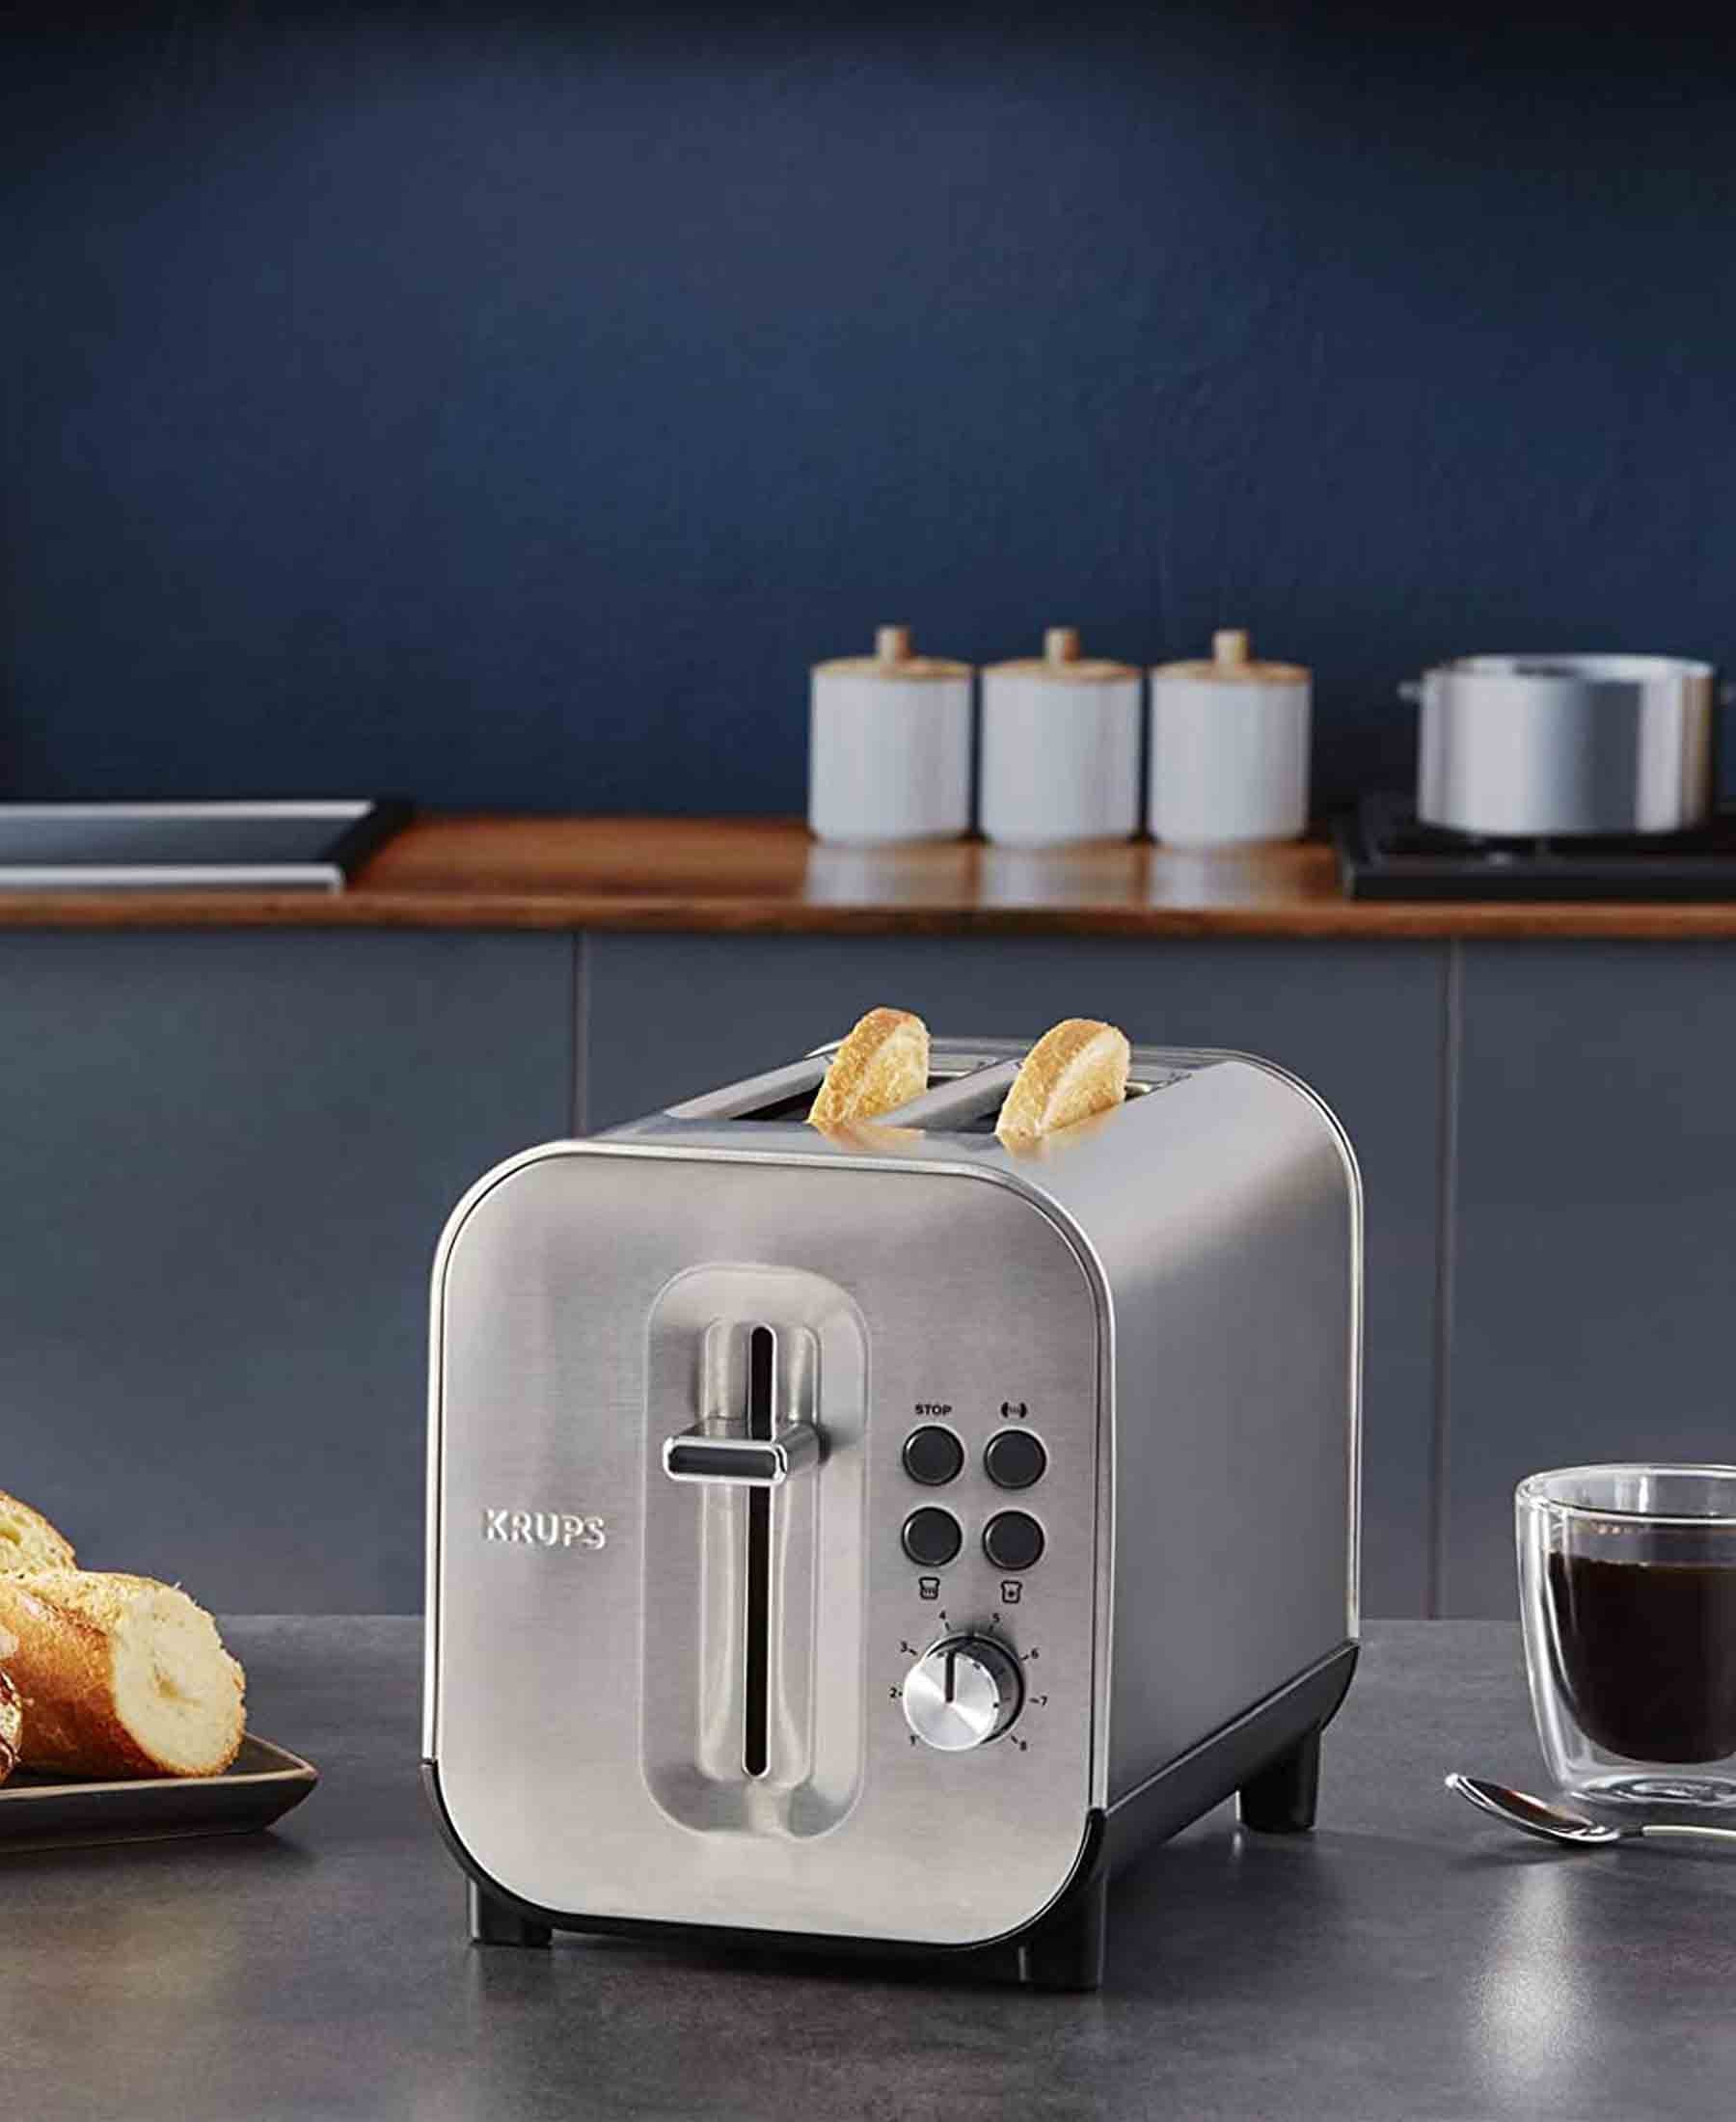 Krups Stainless Steel 2 Slice Toaster 850W - Silver